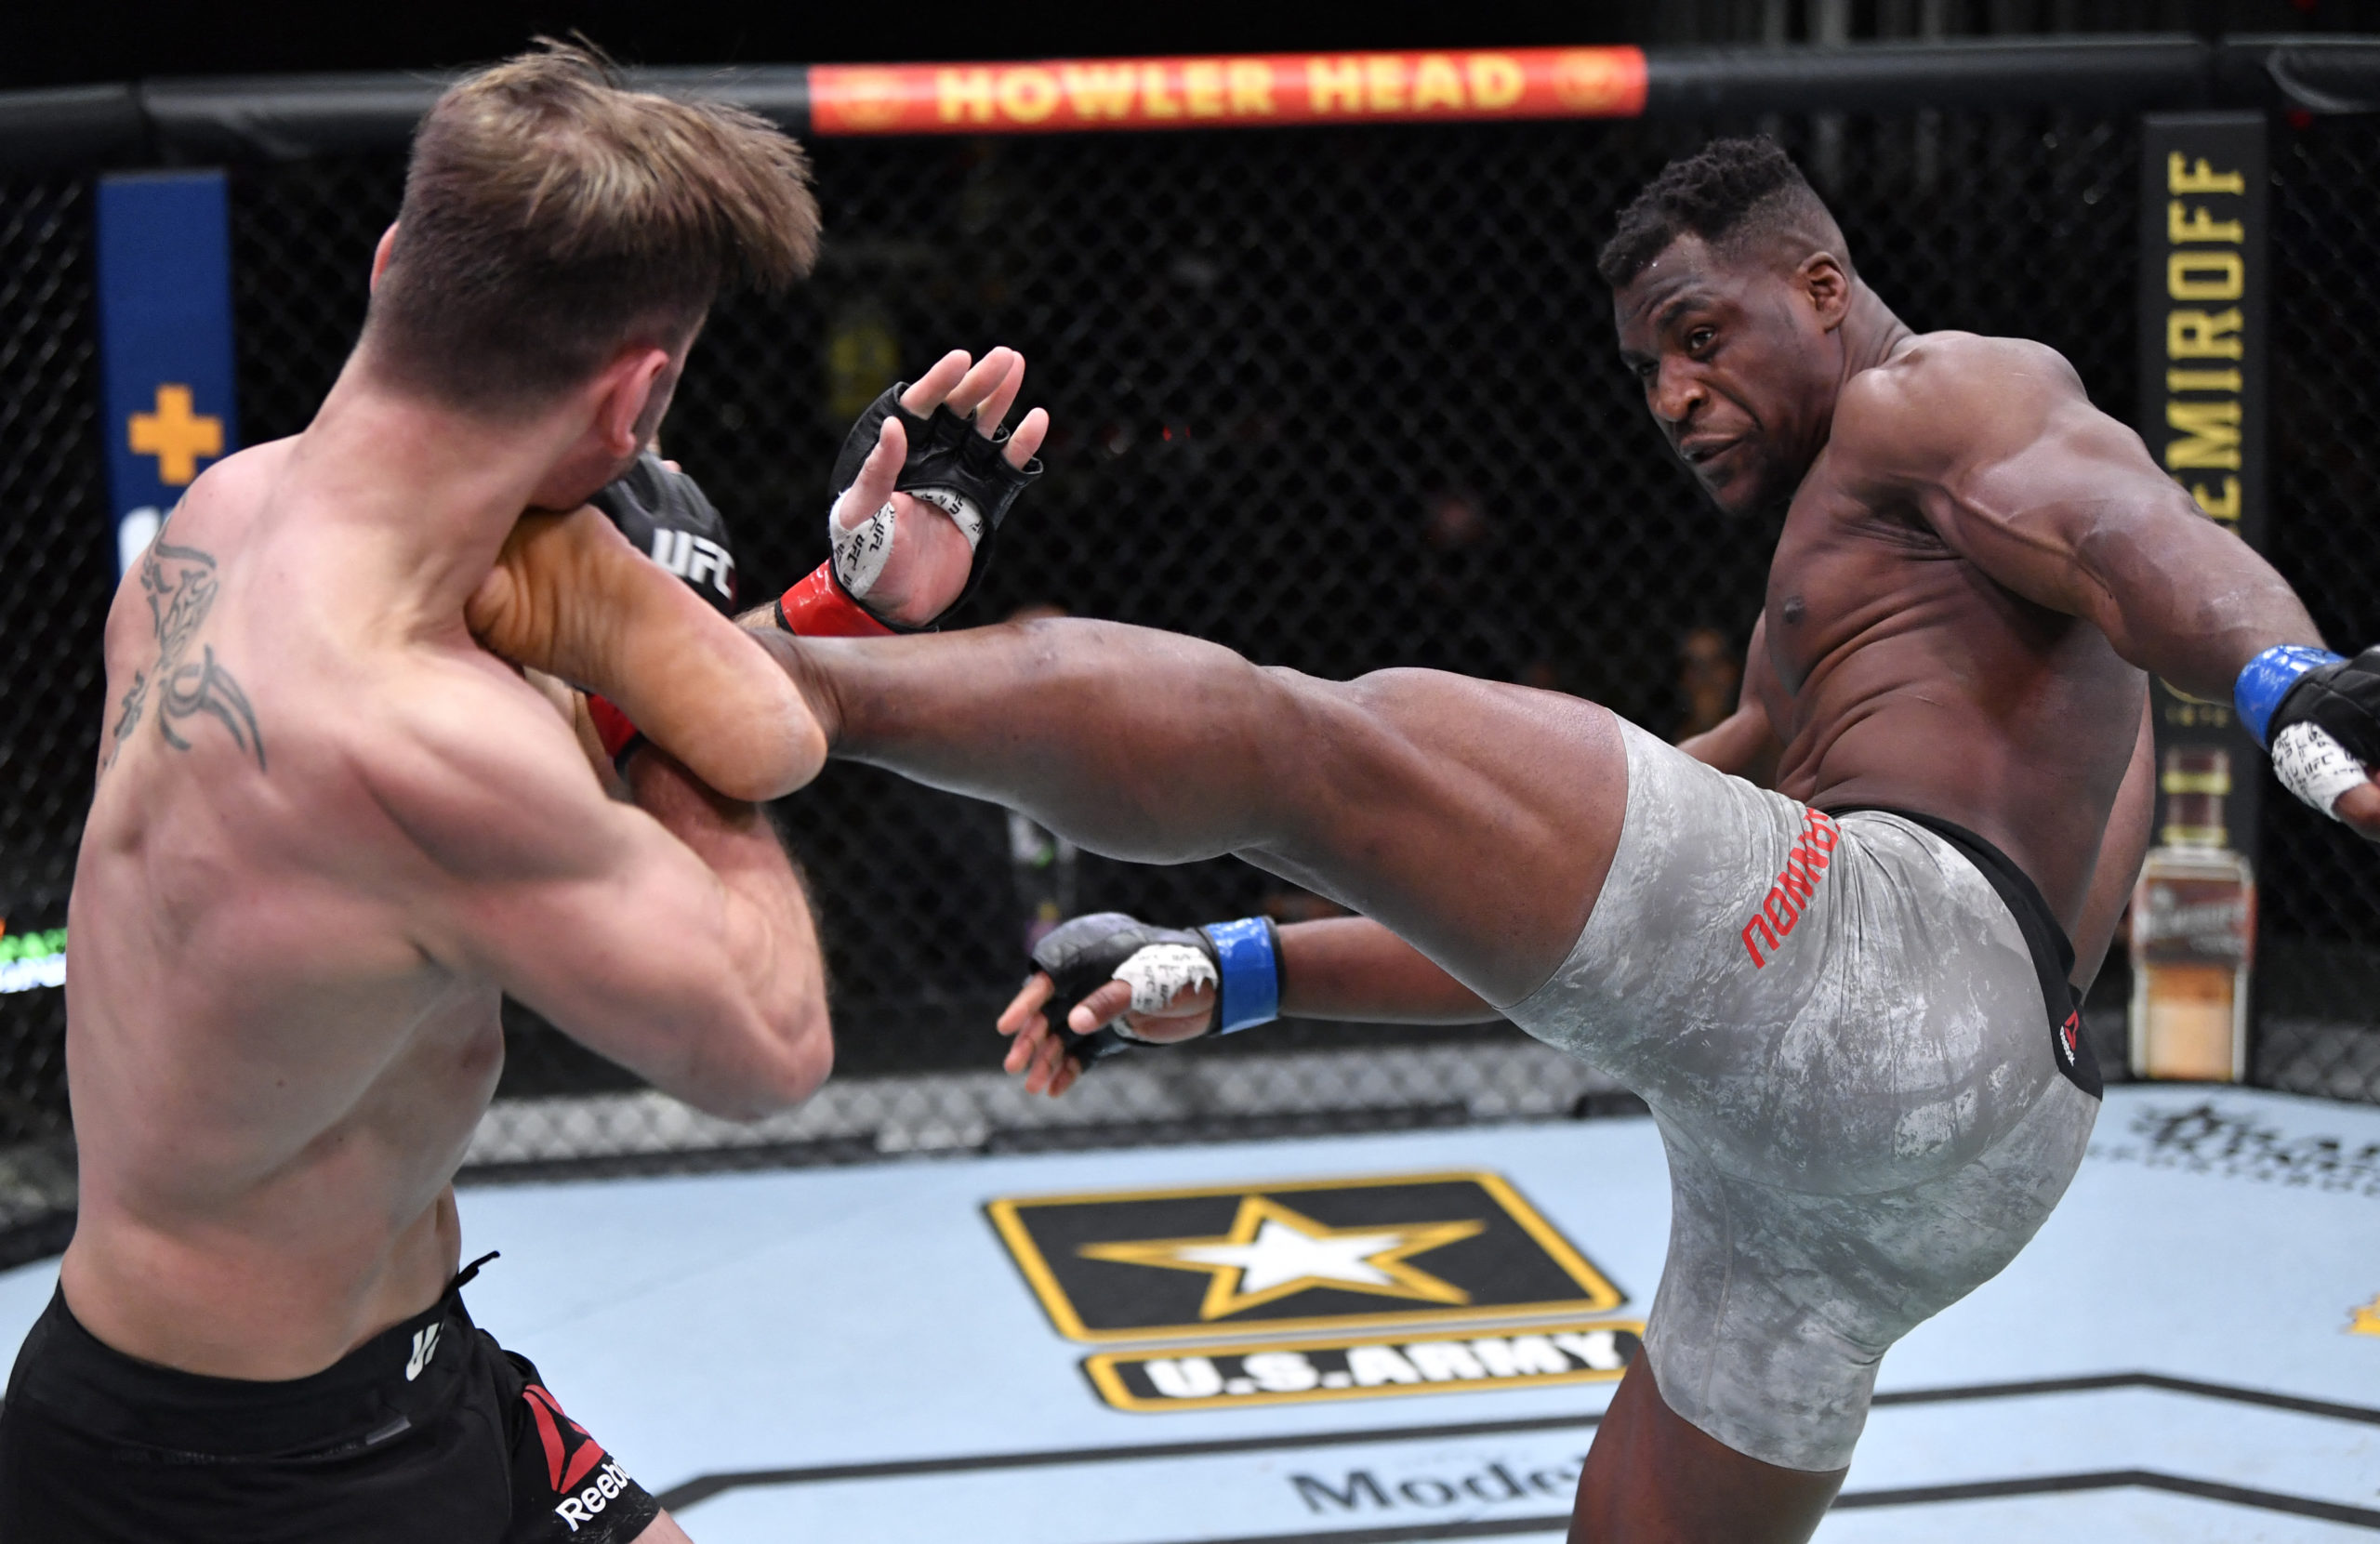 Mar 27, 2021; Las Vegas, NV, USA; Francis Ngannou of Cameroon kicks Stipe Miocic in their UFC heavyweight championship fight during the UFC 260 event at UFC APEX on March 27, 2021 in Las Vegas, Nevada. 